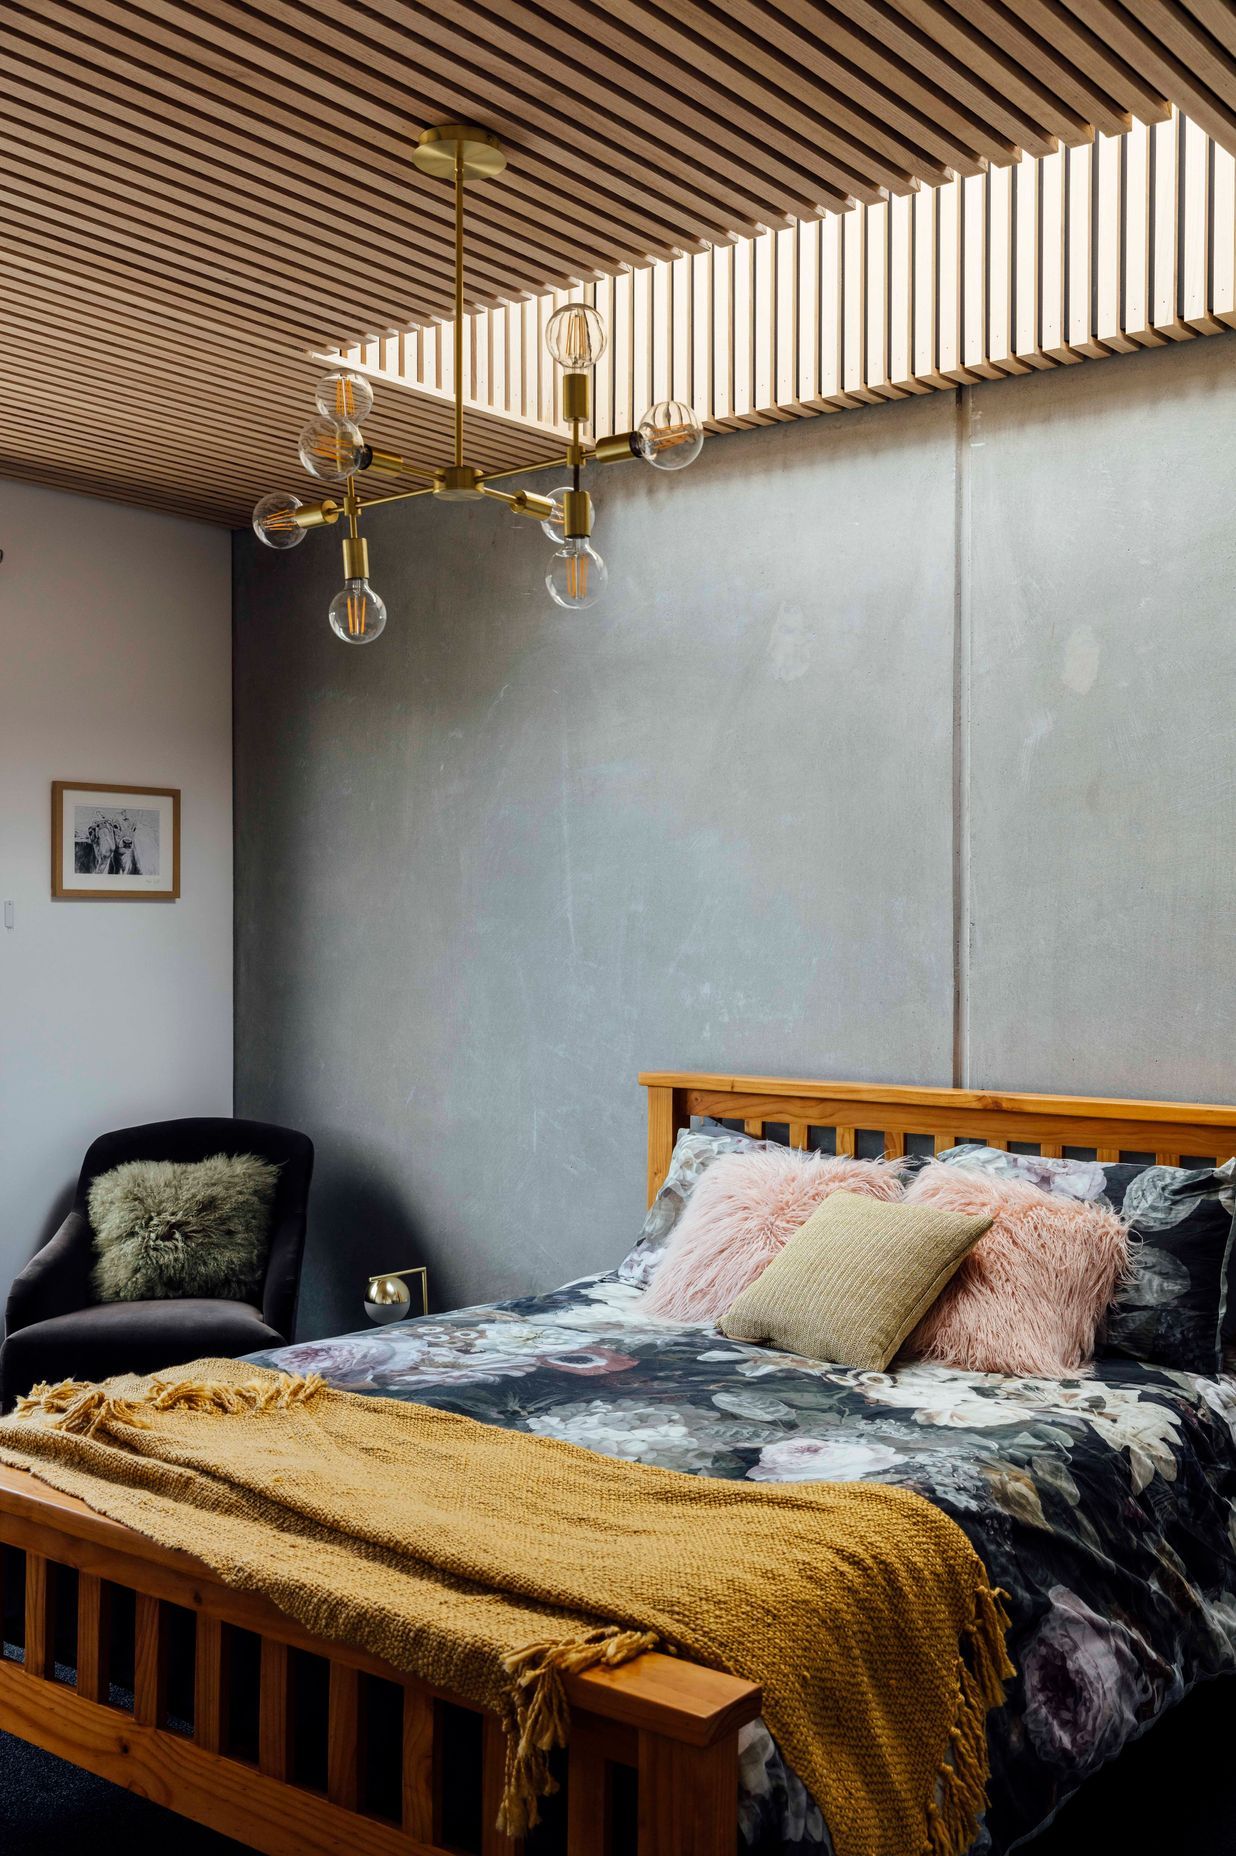 In contrast, the concrete wall in the guest bedroom is smooth but still perfectly imperfect.